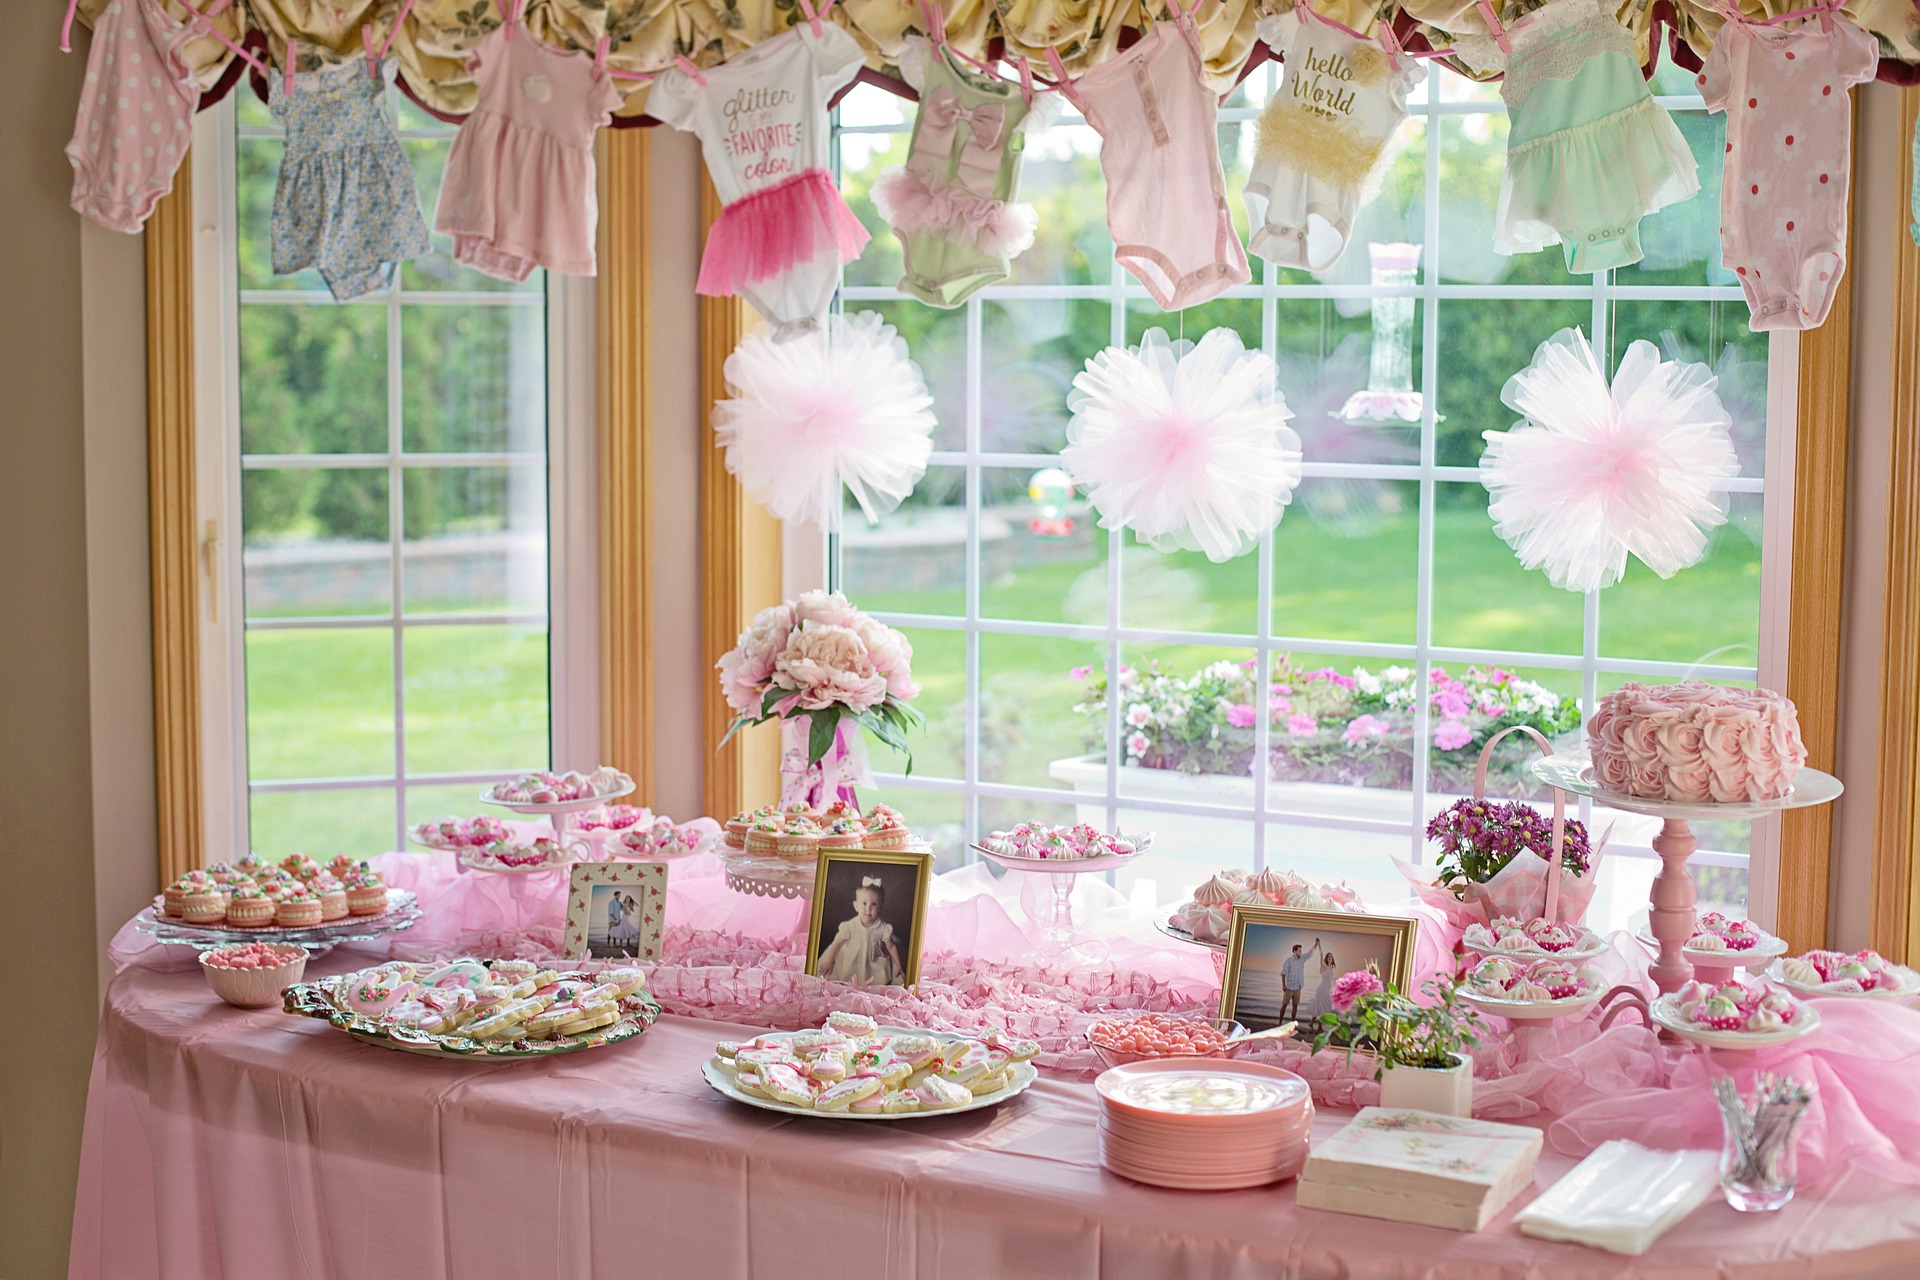 pink themed food table backlight by a big window that has puff balls hanging in it and cute onesies haging above it | 12 Steps to Hosting the Perfect Baby Shower by Busy Life Healthy Wife